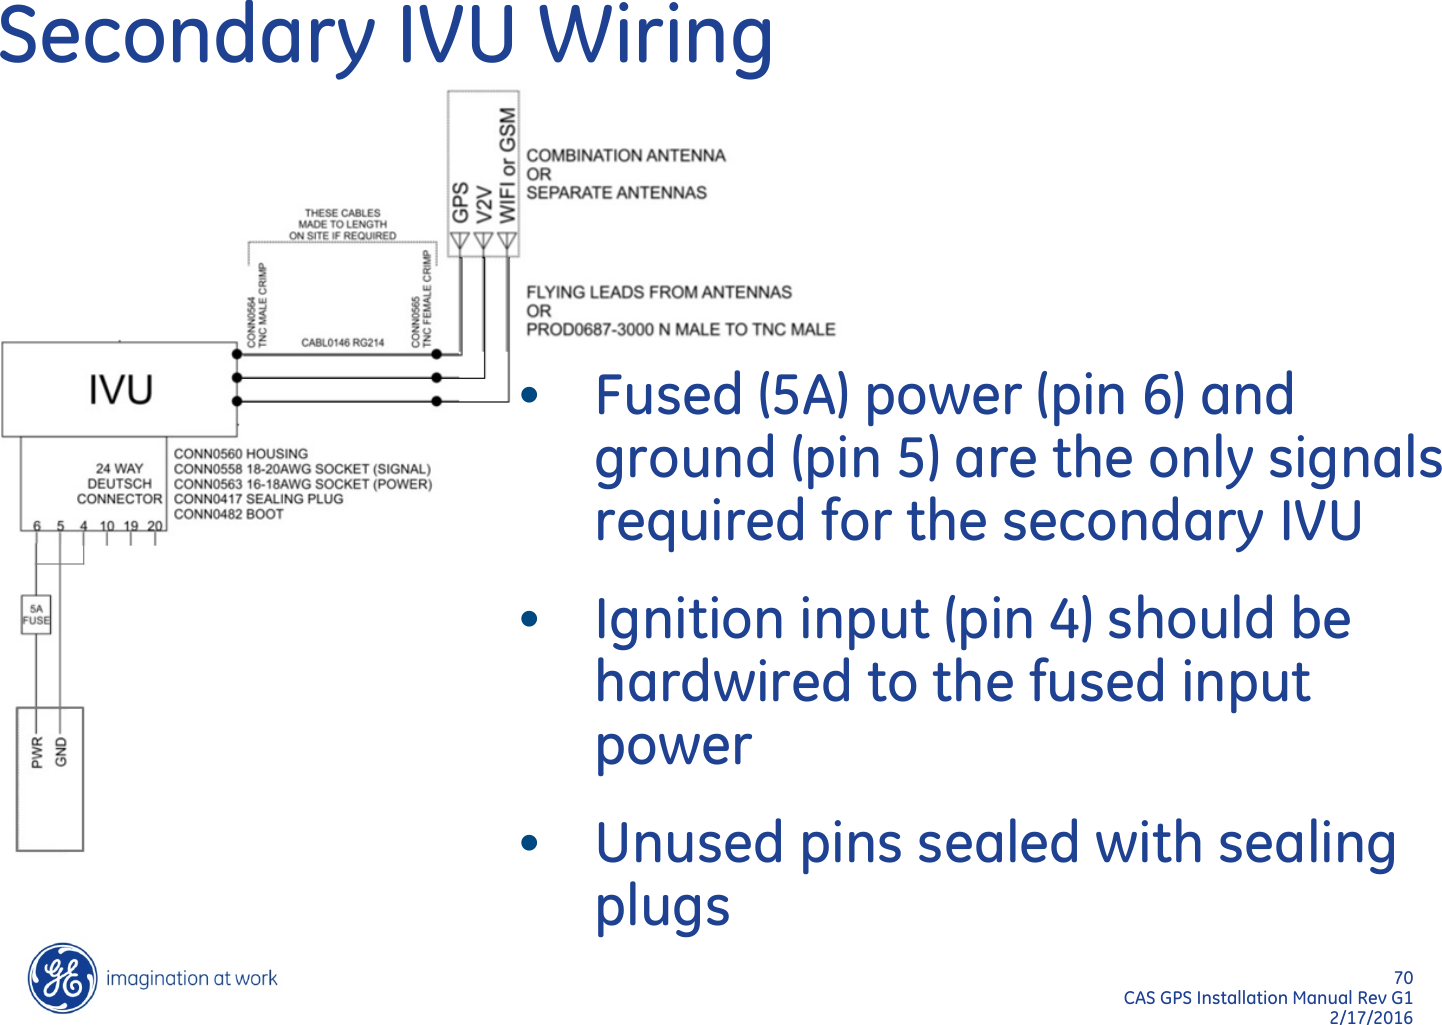 70  CAS GPS Installation Manual Rev G1 2/17/2016 Secondary IVU Wiring •Fused (5A) power (pin 6) and ground (pin 5) are the only signals required for the secondary IVU •Ignition input (pin 4) should be hardwired to the fused input power •Unused pins sealed with sealing plugs 